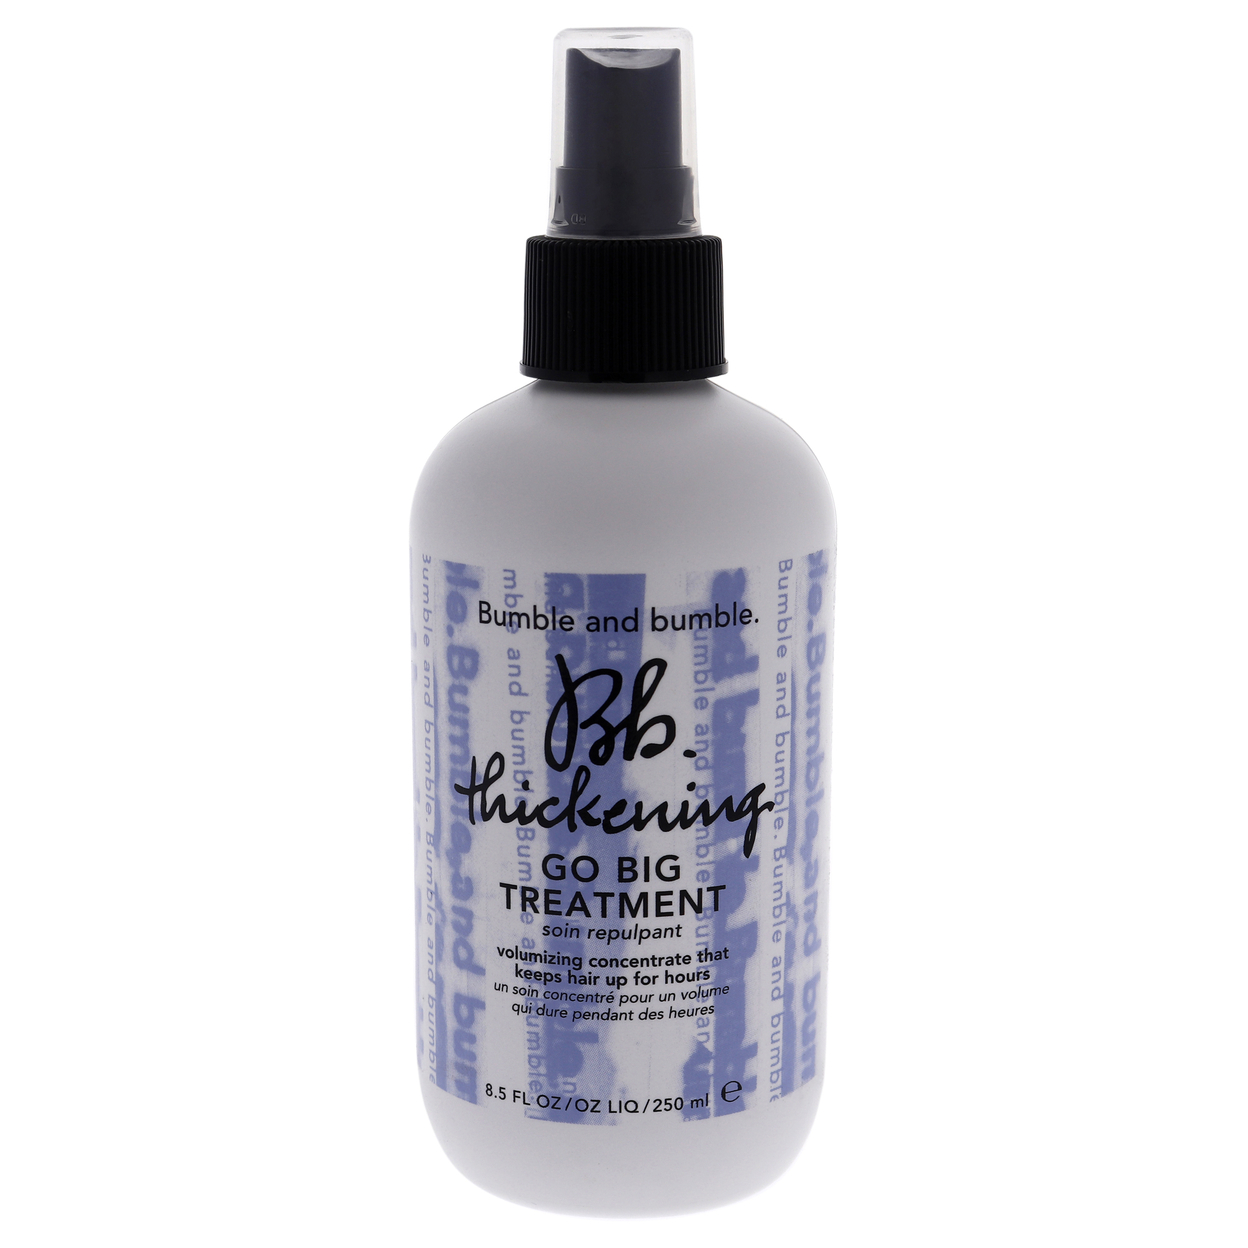 Bumble And Bumble Thickening Go Big Treatment 8.5 Oz